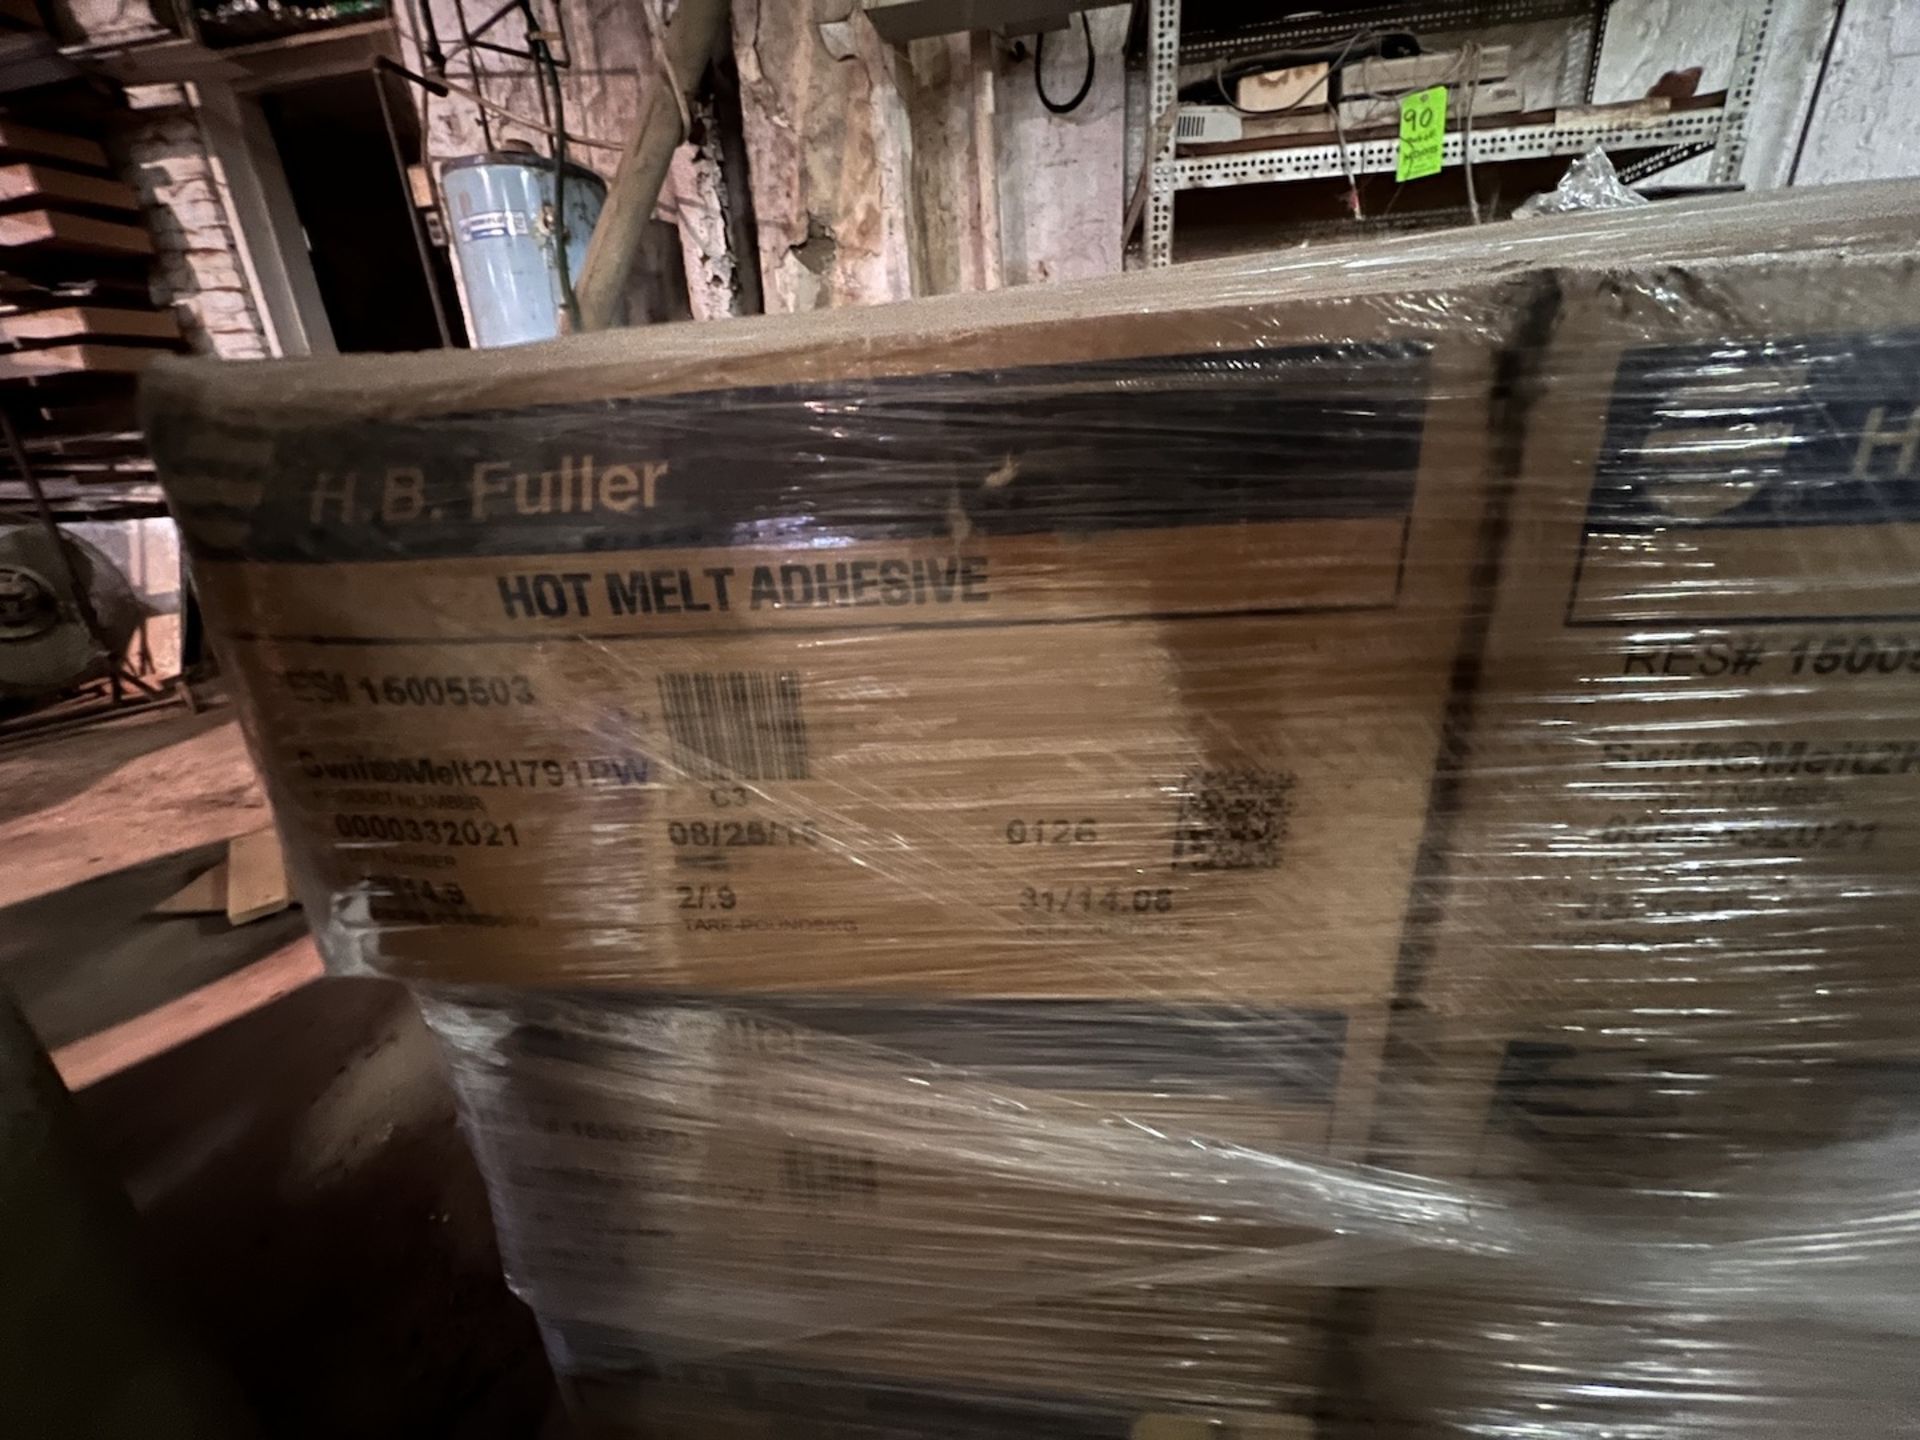 PALLET OF (26) BOXES OF H.B. FULLER HOT MELT GLUE ADHESIVE - Image 5 of 6